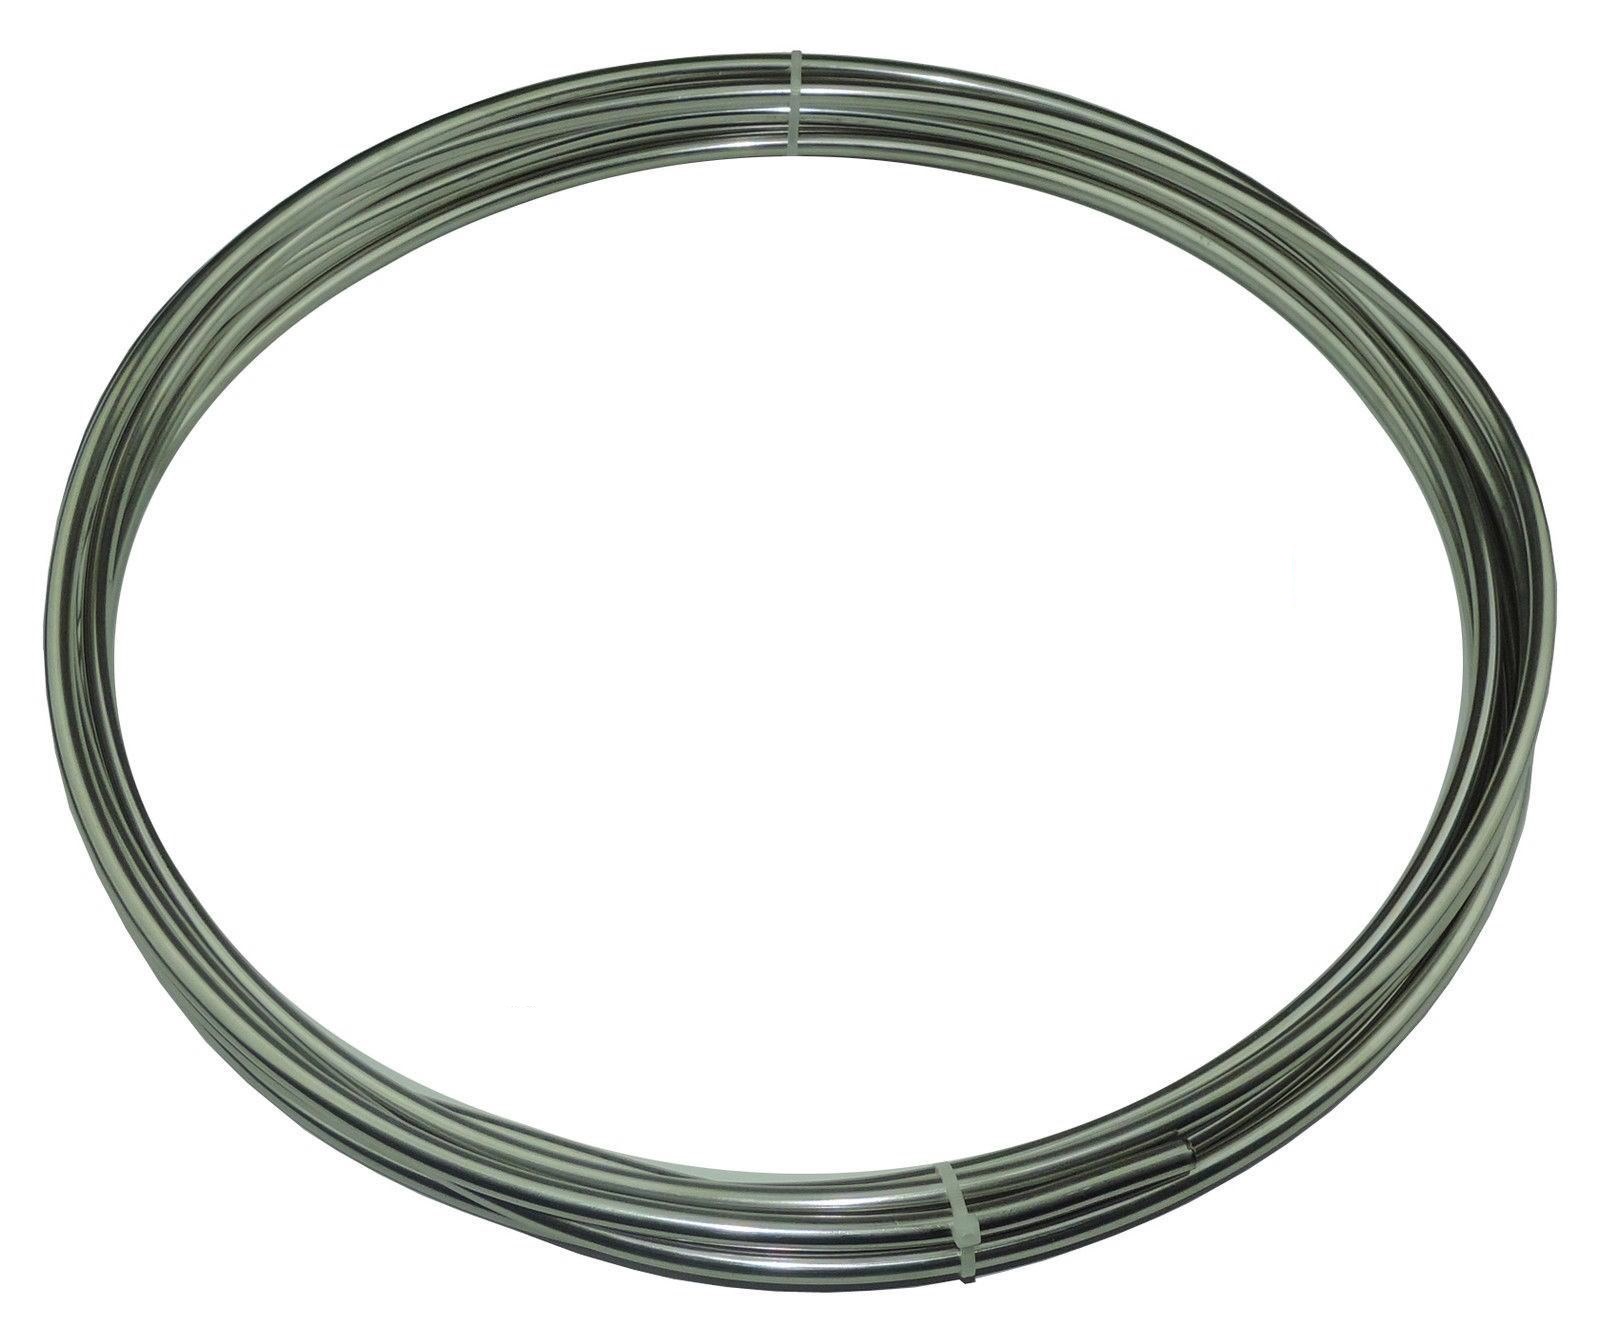 14 Stainless Steel Brake and Fuel Line 20 Roll